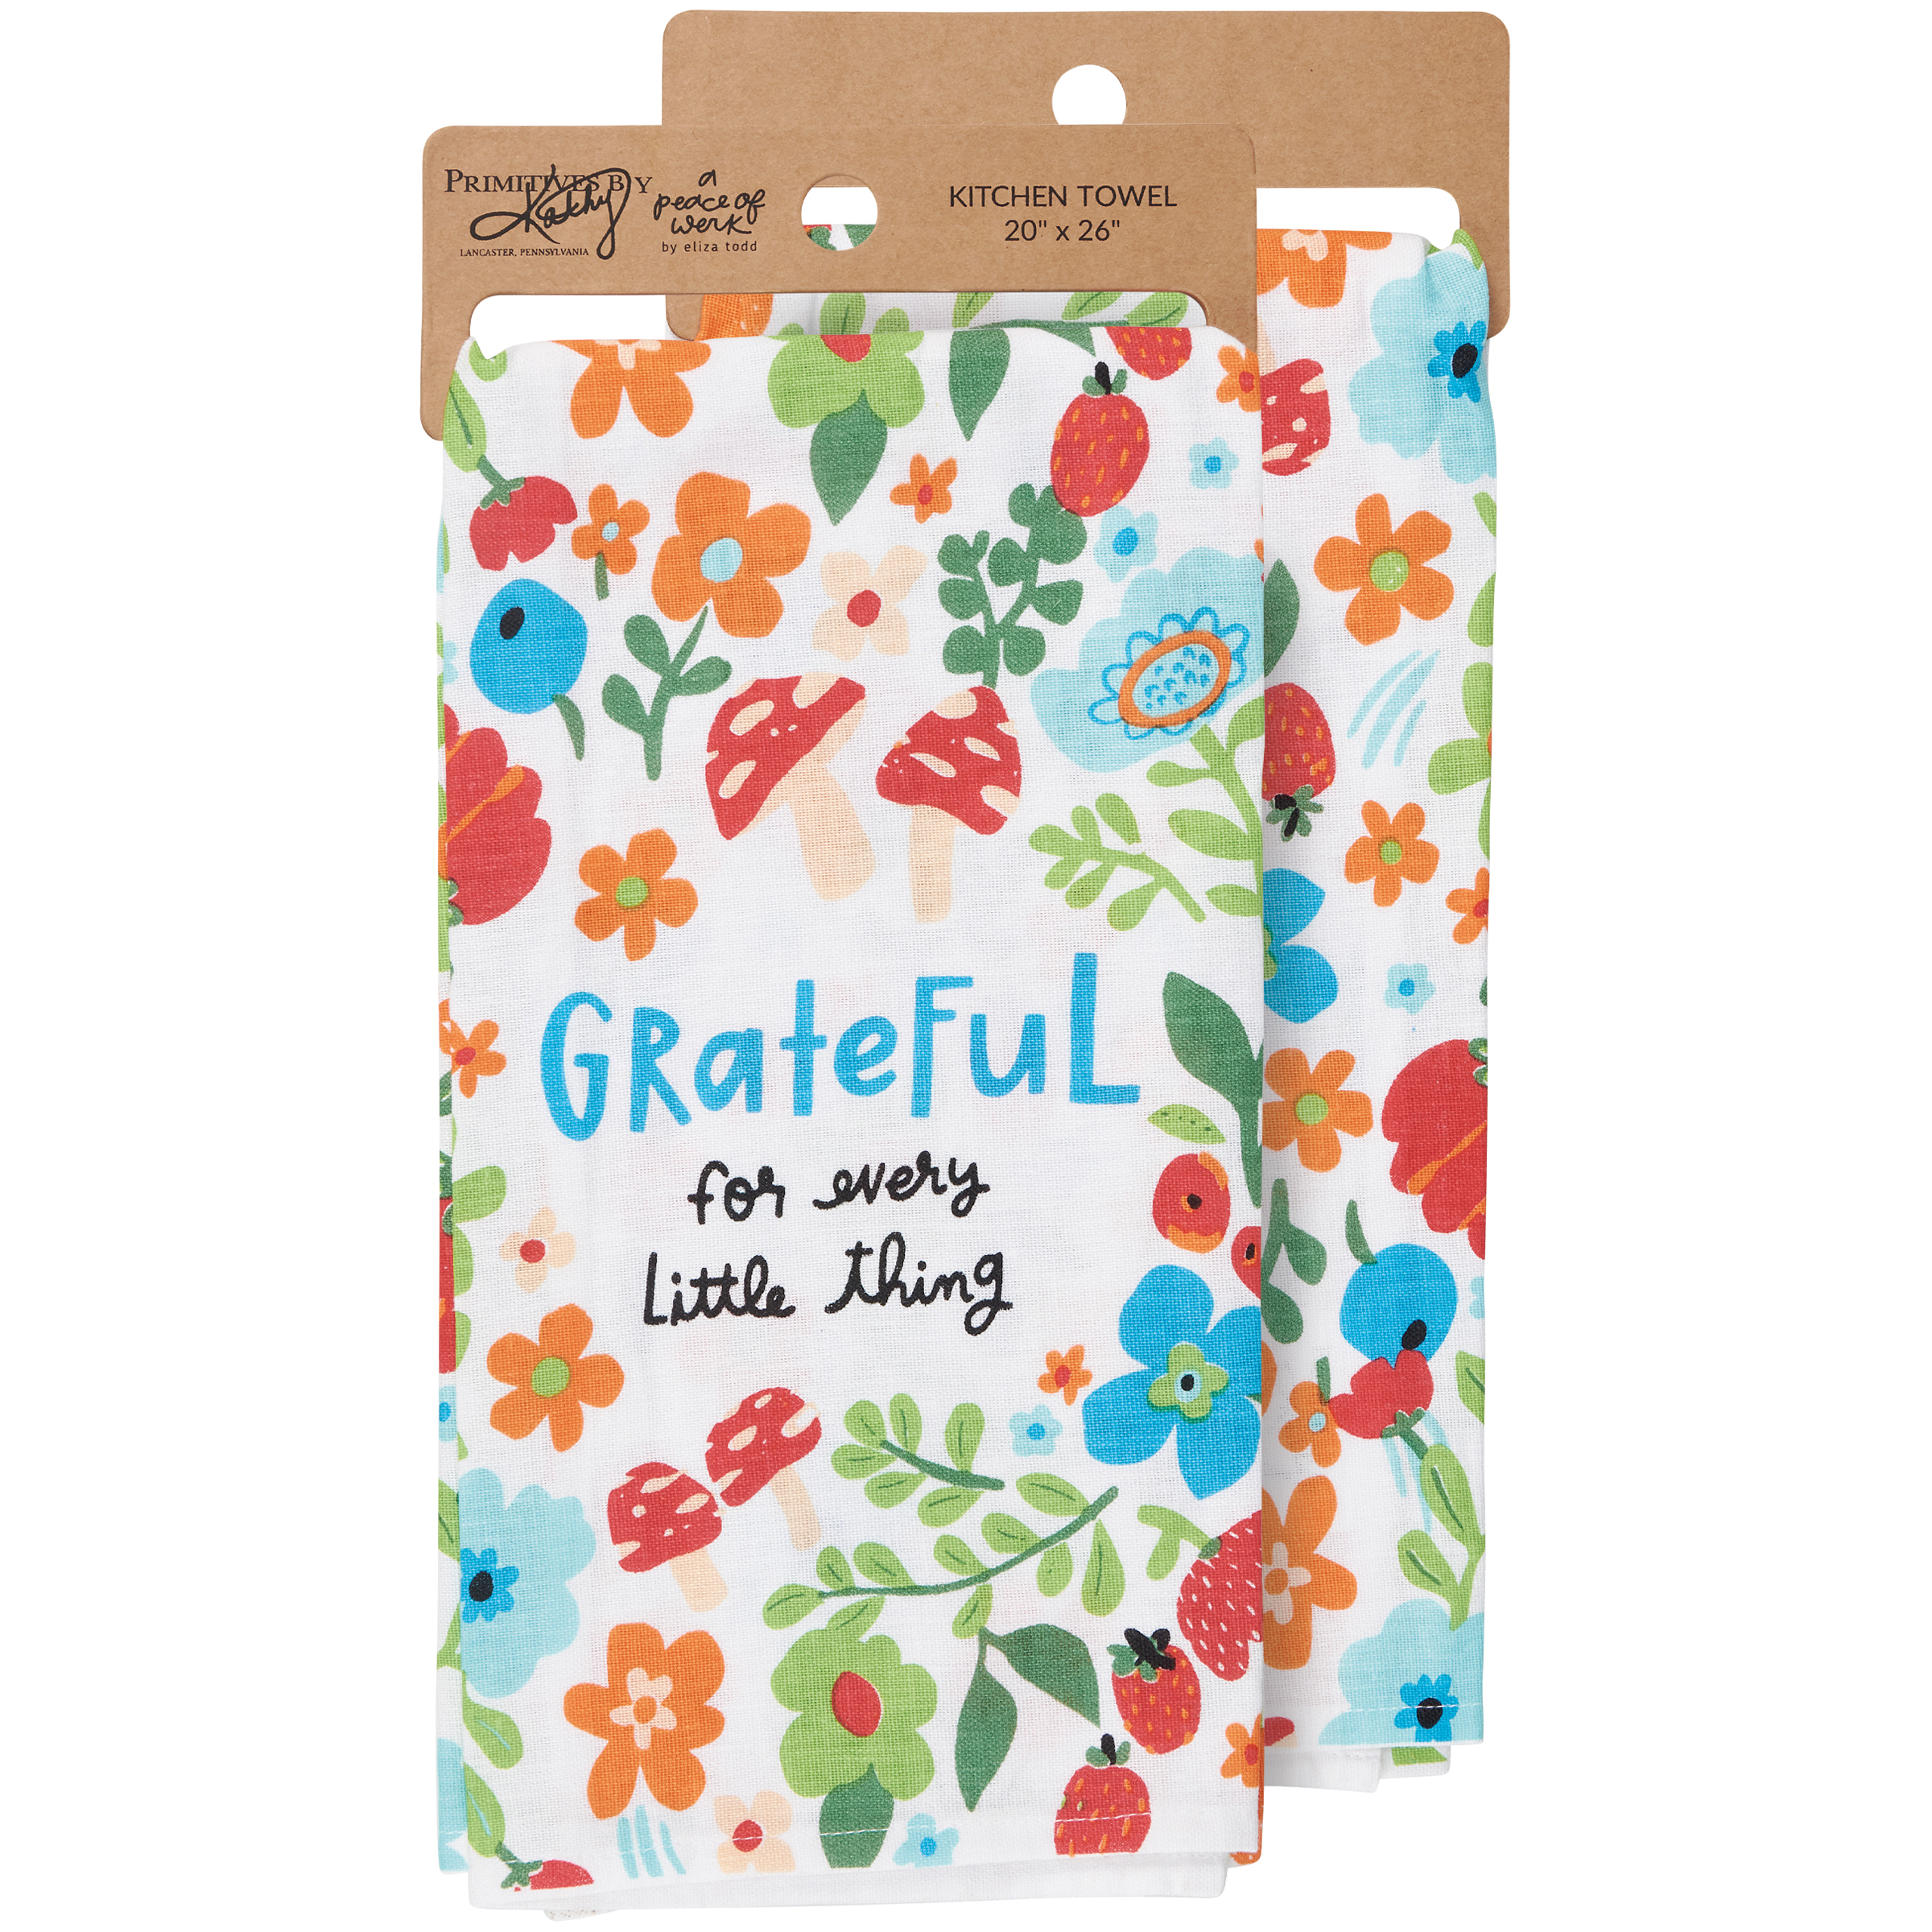 Primitives by Kathy Kitchen Towel - Grateful for Small Things